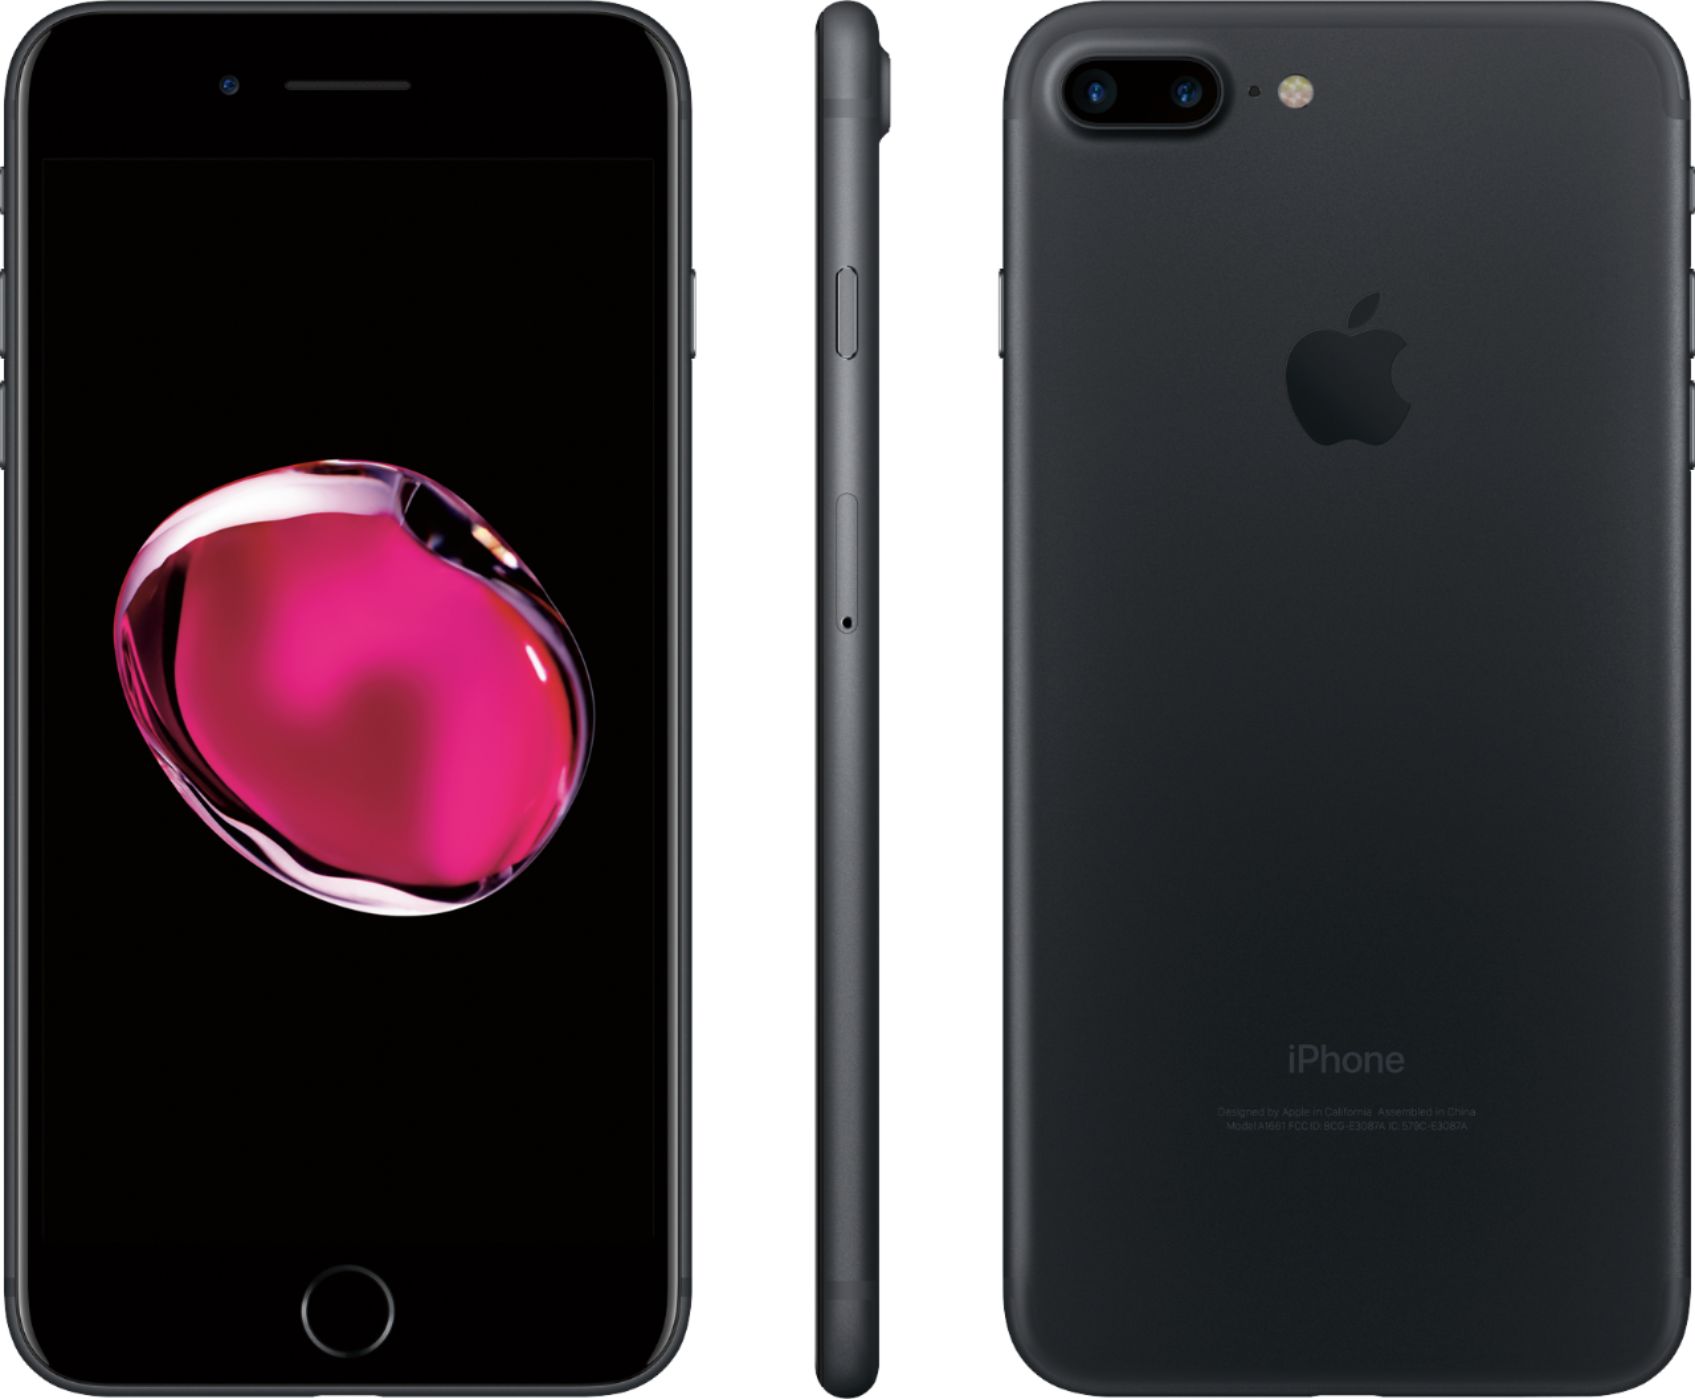 Apple iPhone 7 Plus 32GB Black 32 GB from AT&T